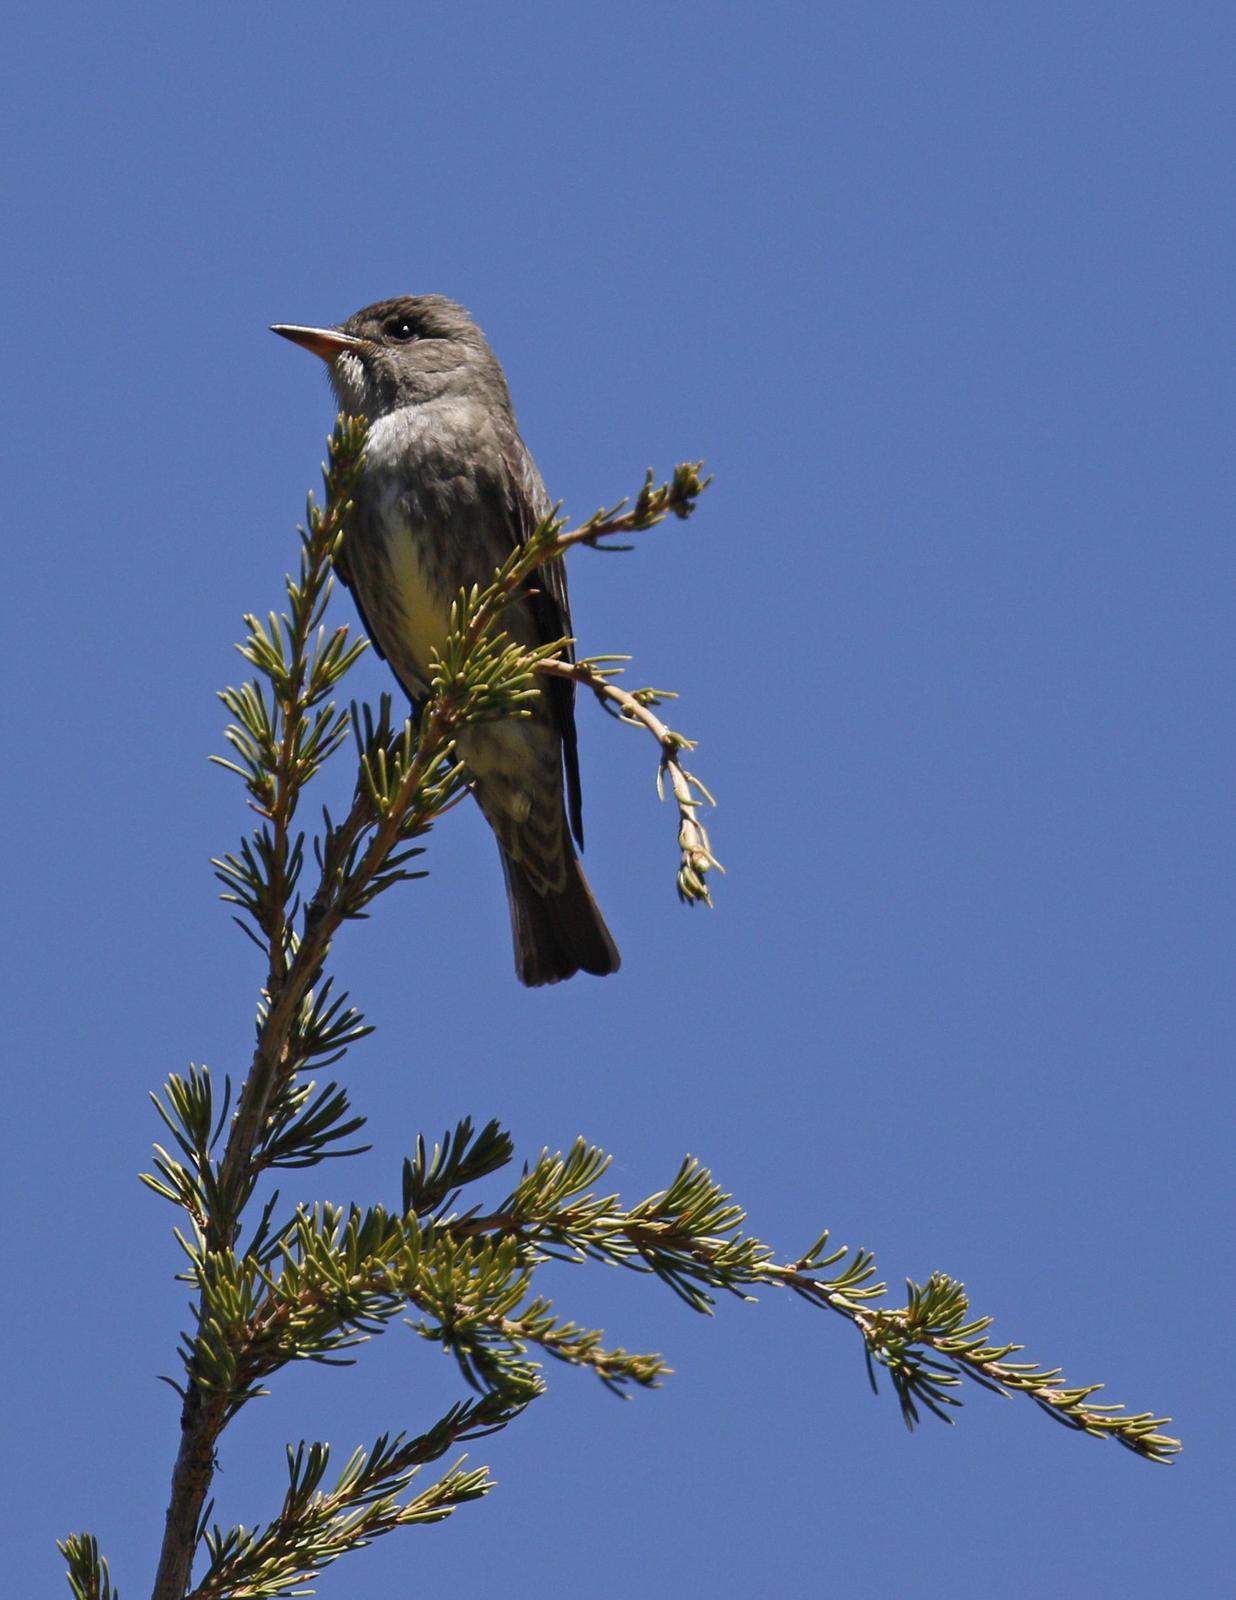 Olive-sided Flycatcher Photo by Emily Willoughby